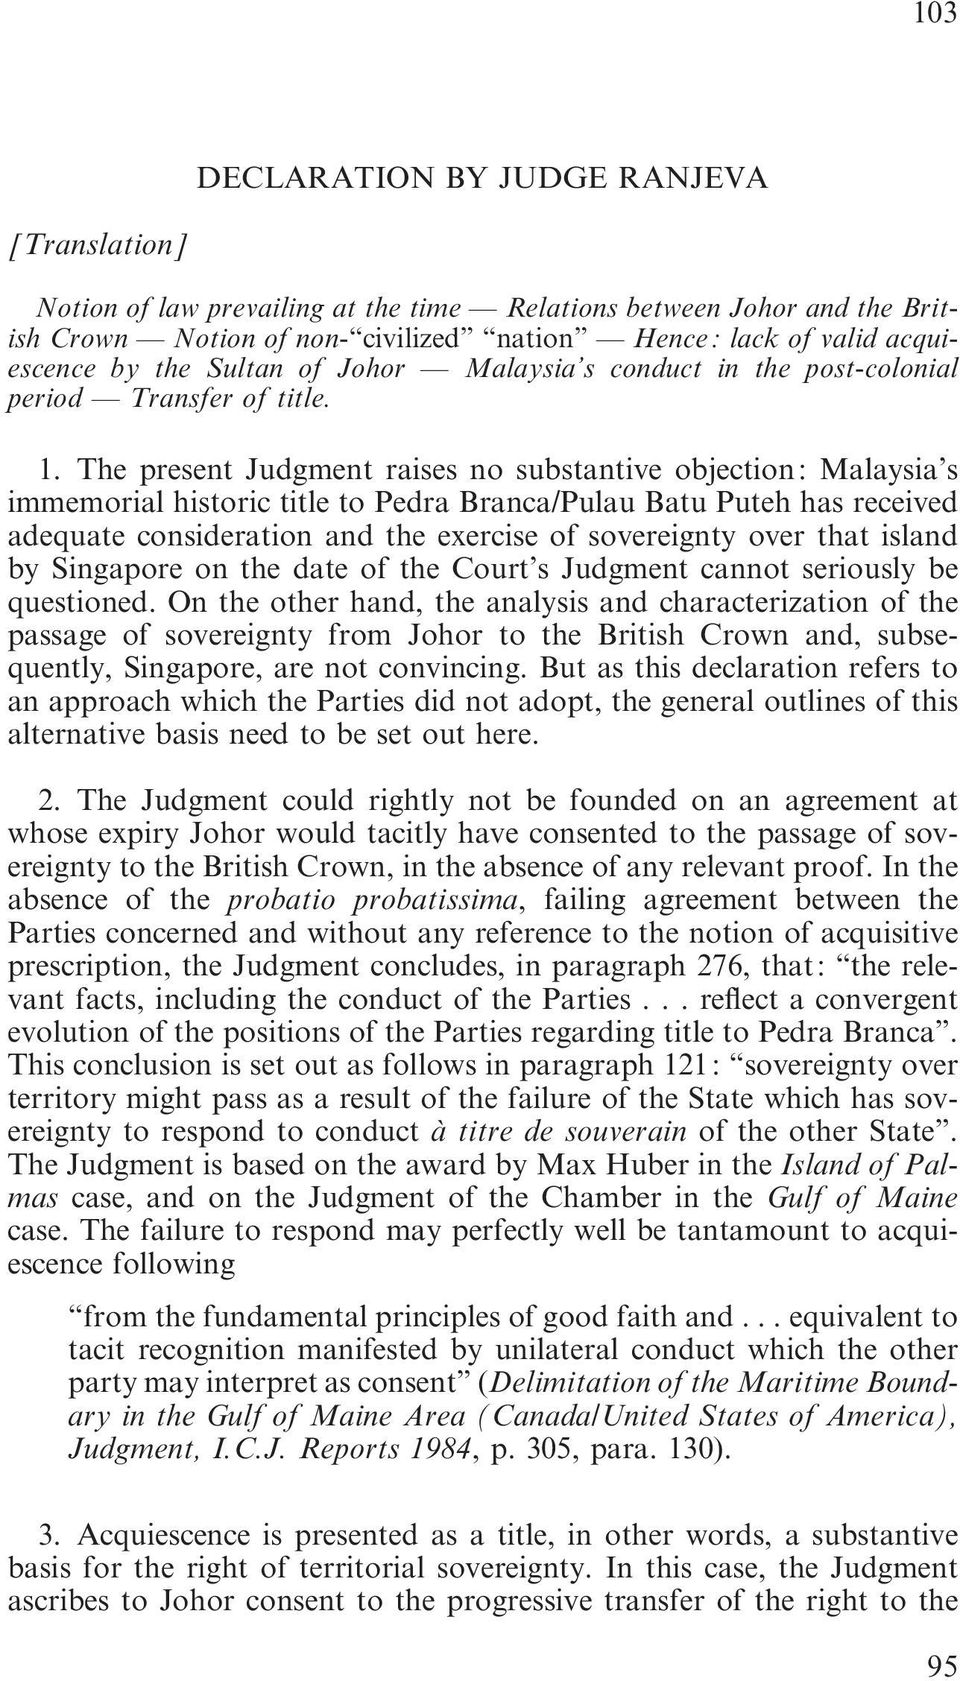 The present Judgment raises no substantive objection: Malaysia s immemorial historic title to Pedra Branca/Pulau Batu Puteh has received adequate consideration and the exercise of sovereignty over